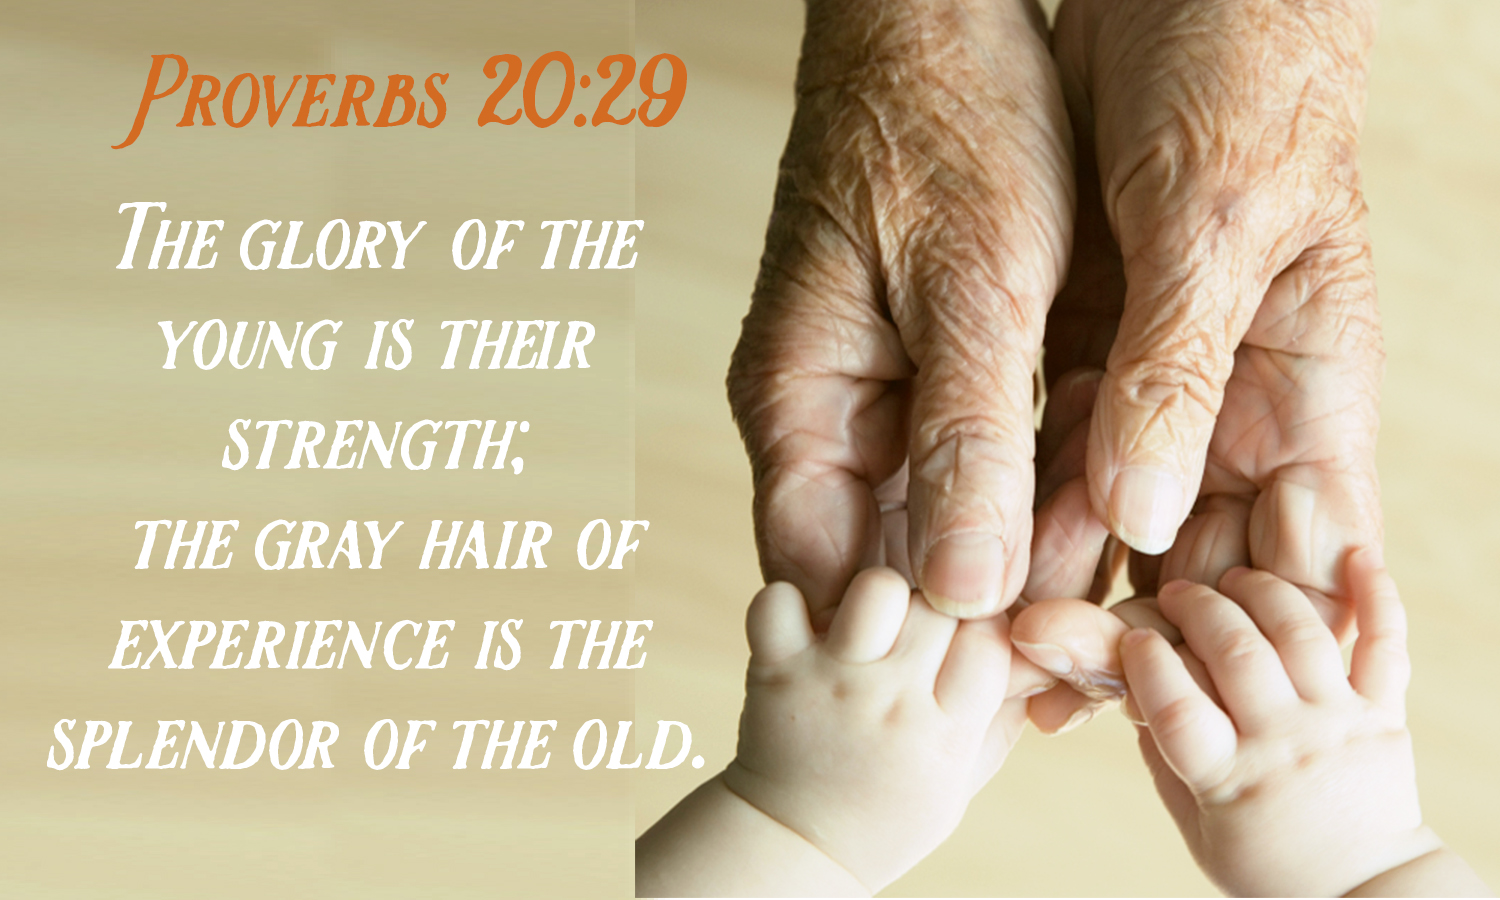 Proverbs 20:29

The glory of the young is their strength; the gray hair of experience is the splendor of the old.